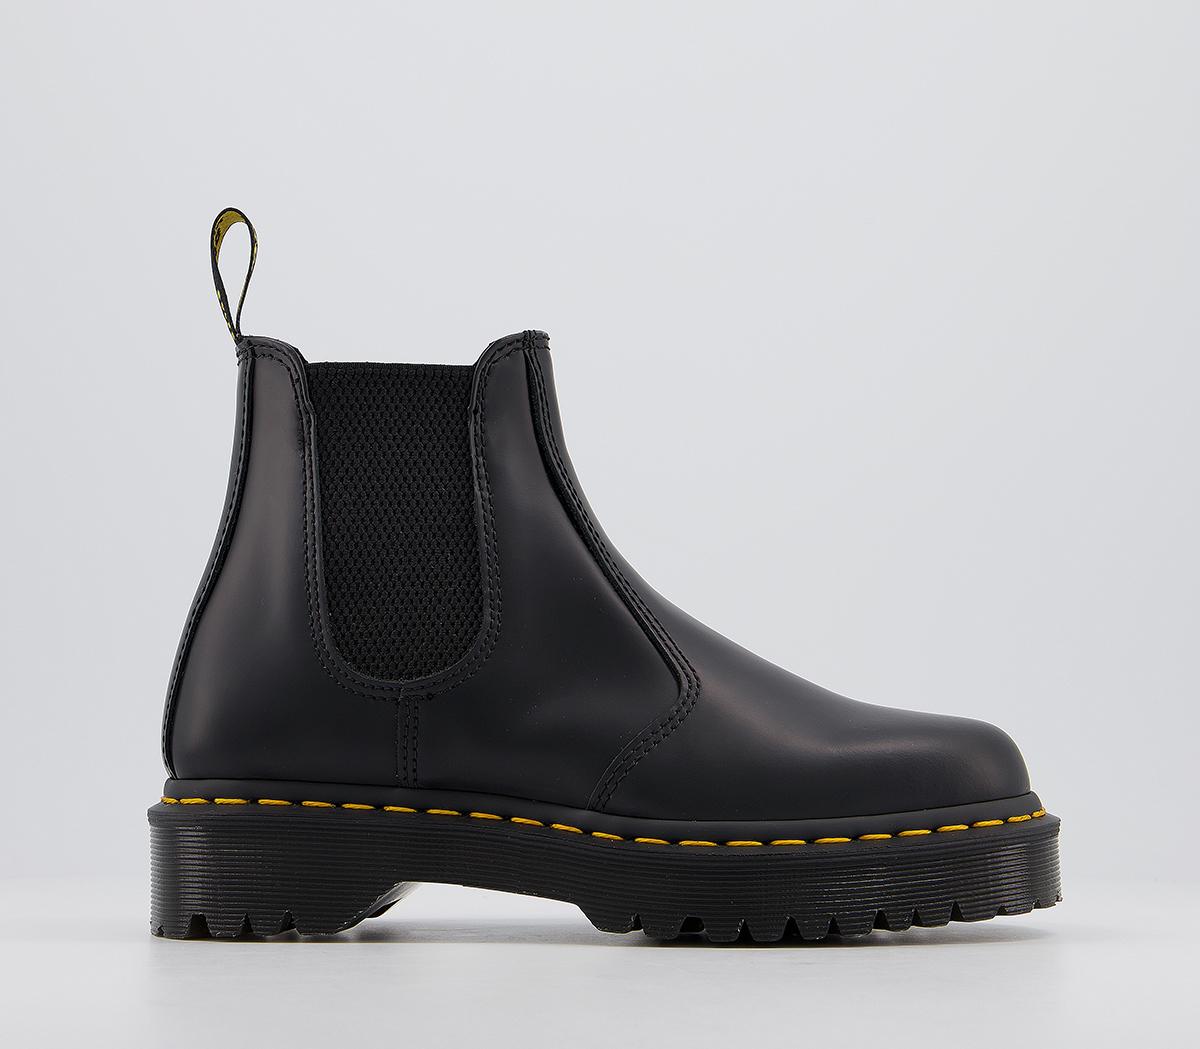 Dr. Martens 2976 Bex Chelsea Boots Black Smooth - Women's Ankle Boots